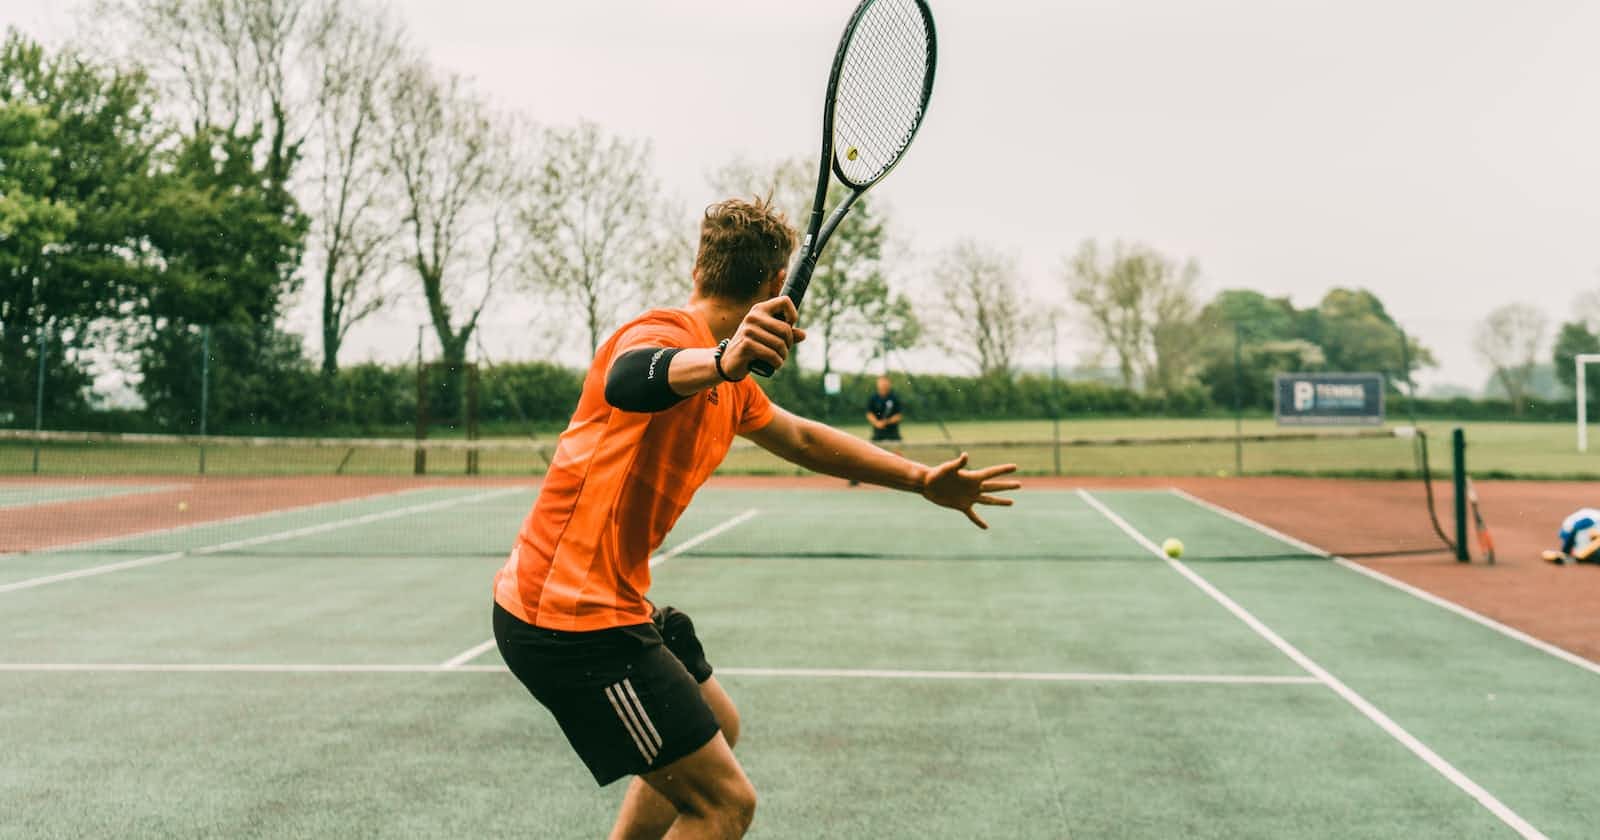 Getting High-Frequency Tennis Motion Data from Apple Watch